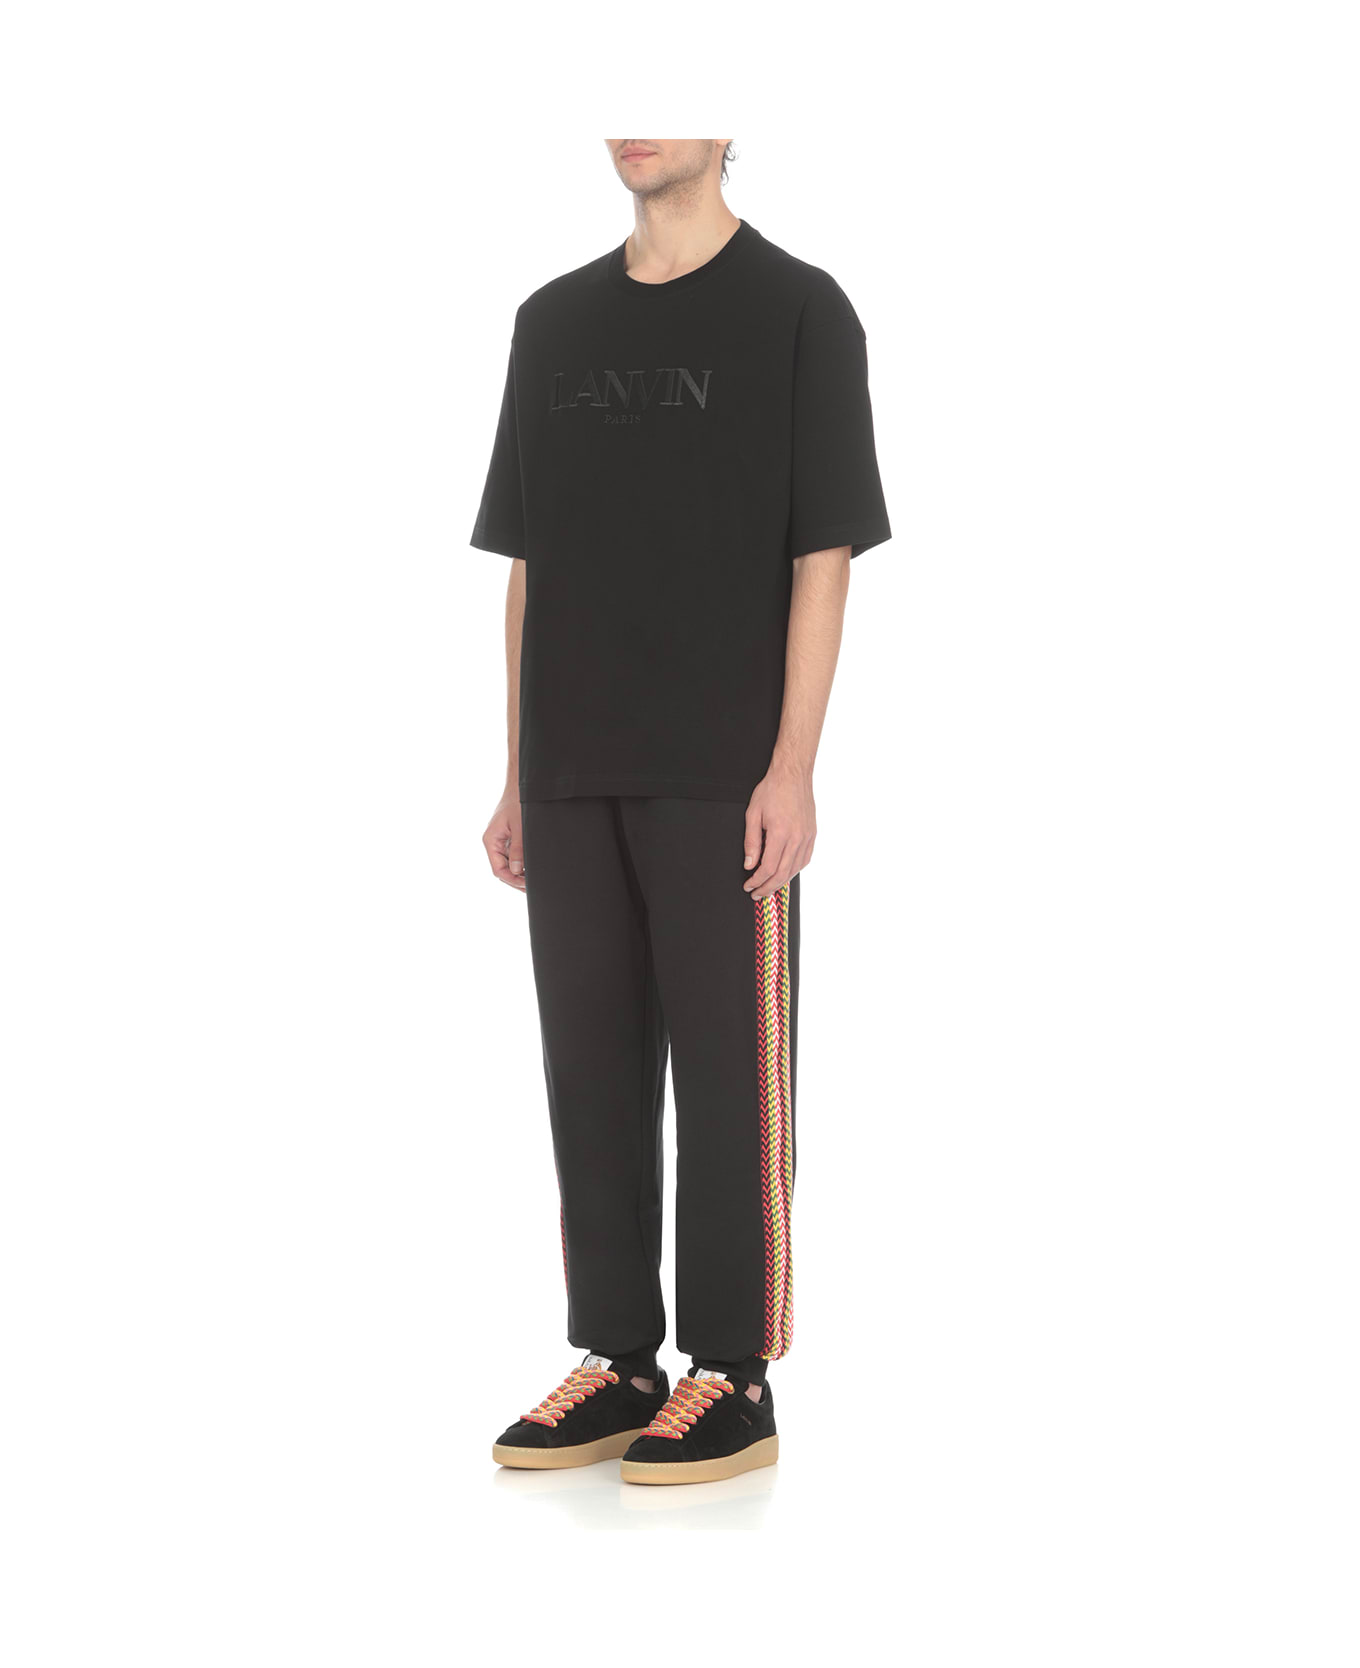 Lanvin T-shirt With Embroidery - Black